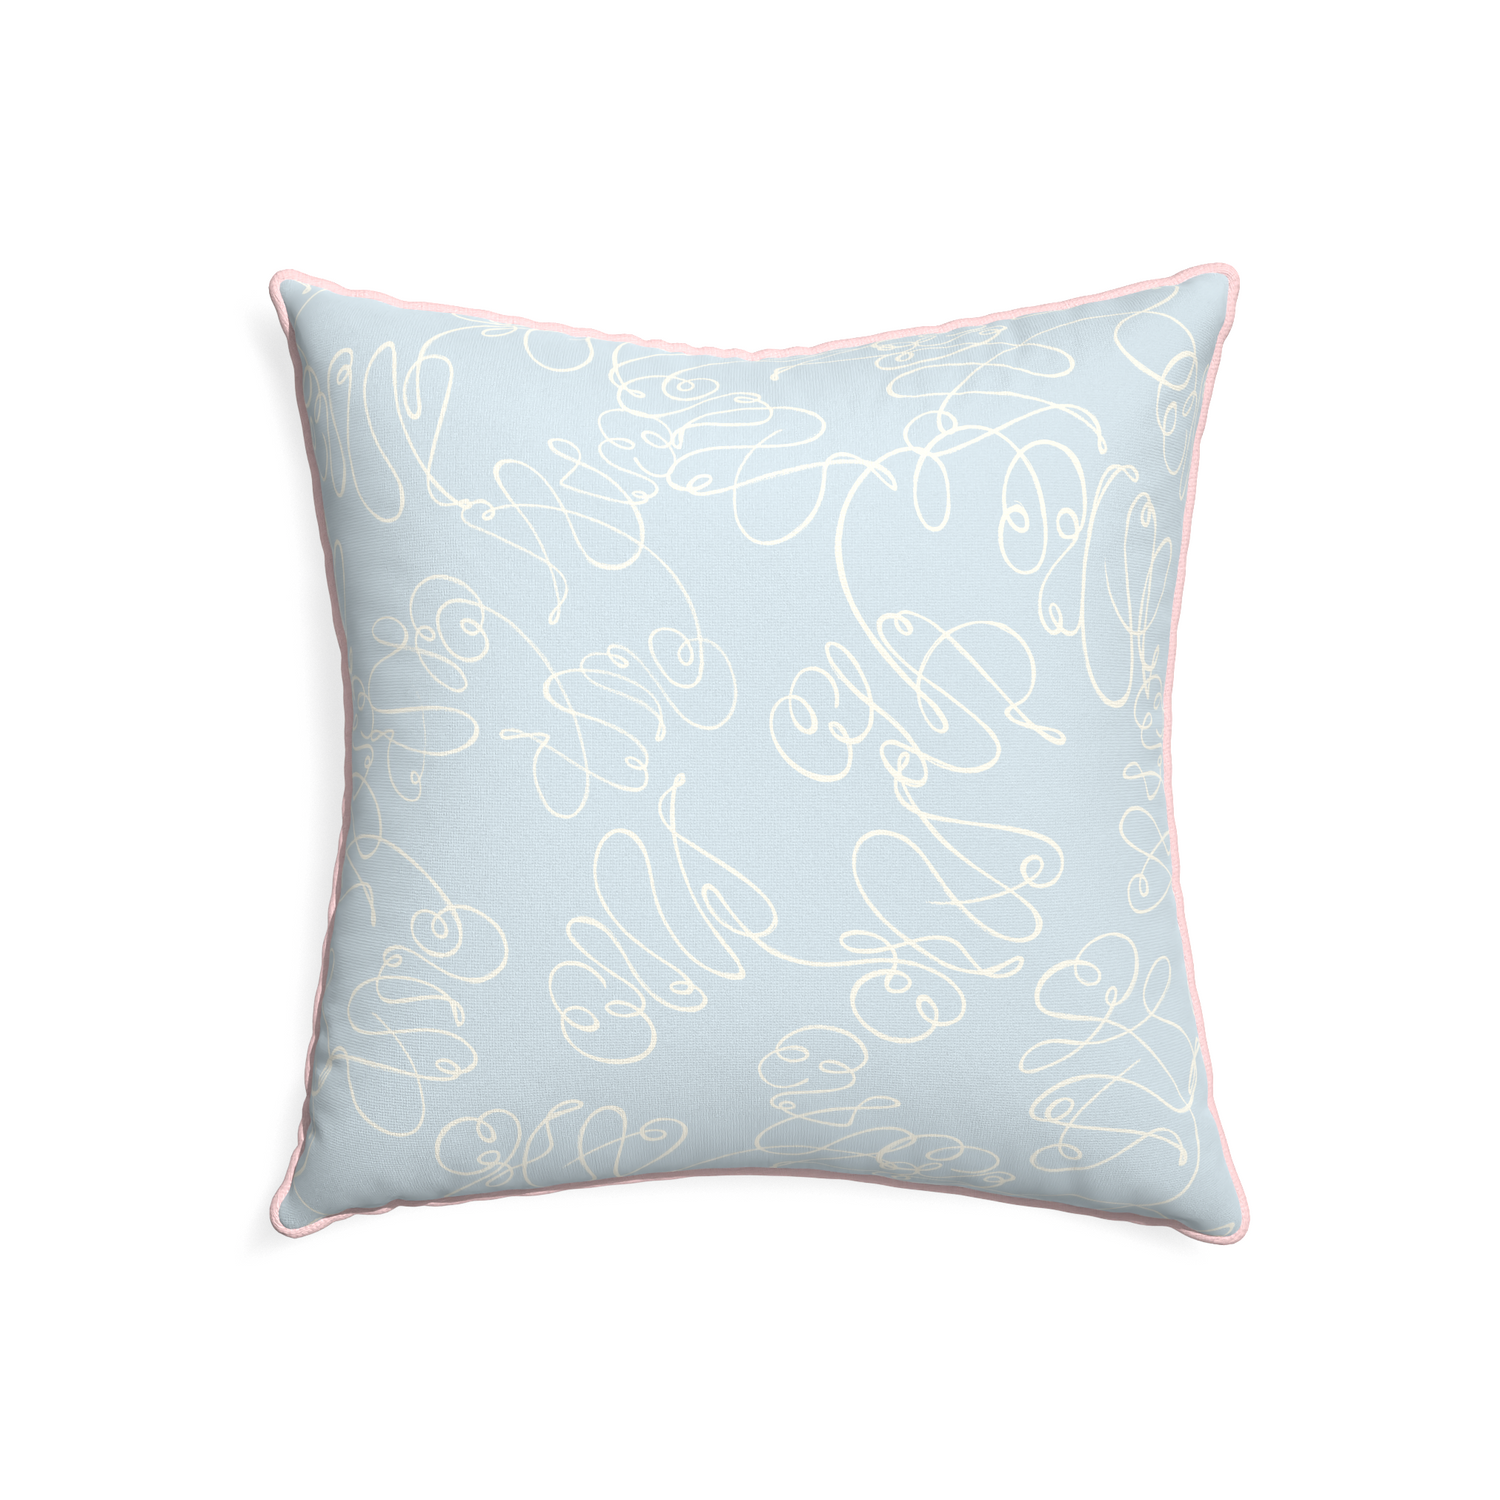 22-square mirabella custom powder blue abstractpillow with petal piping on white background